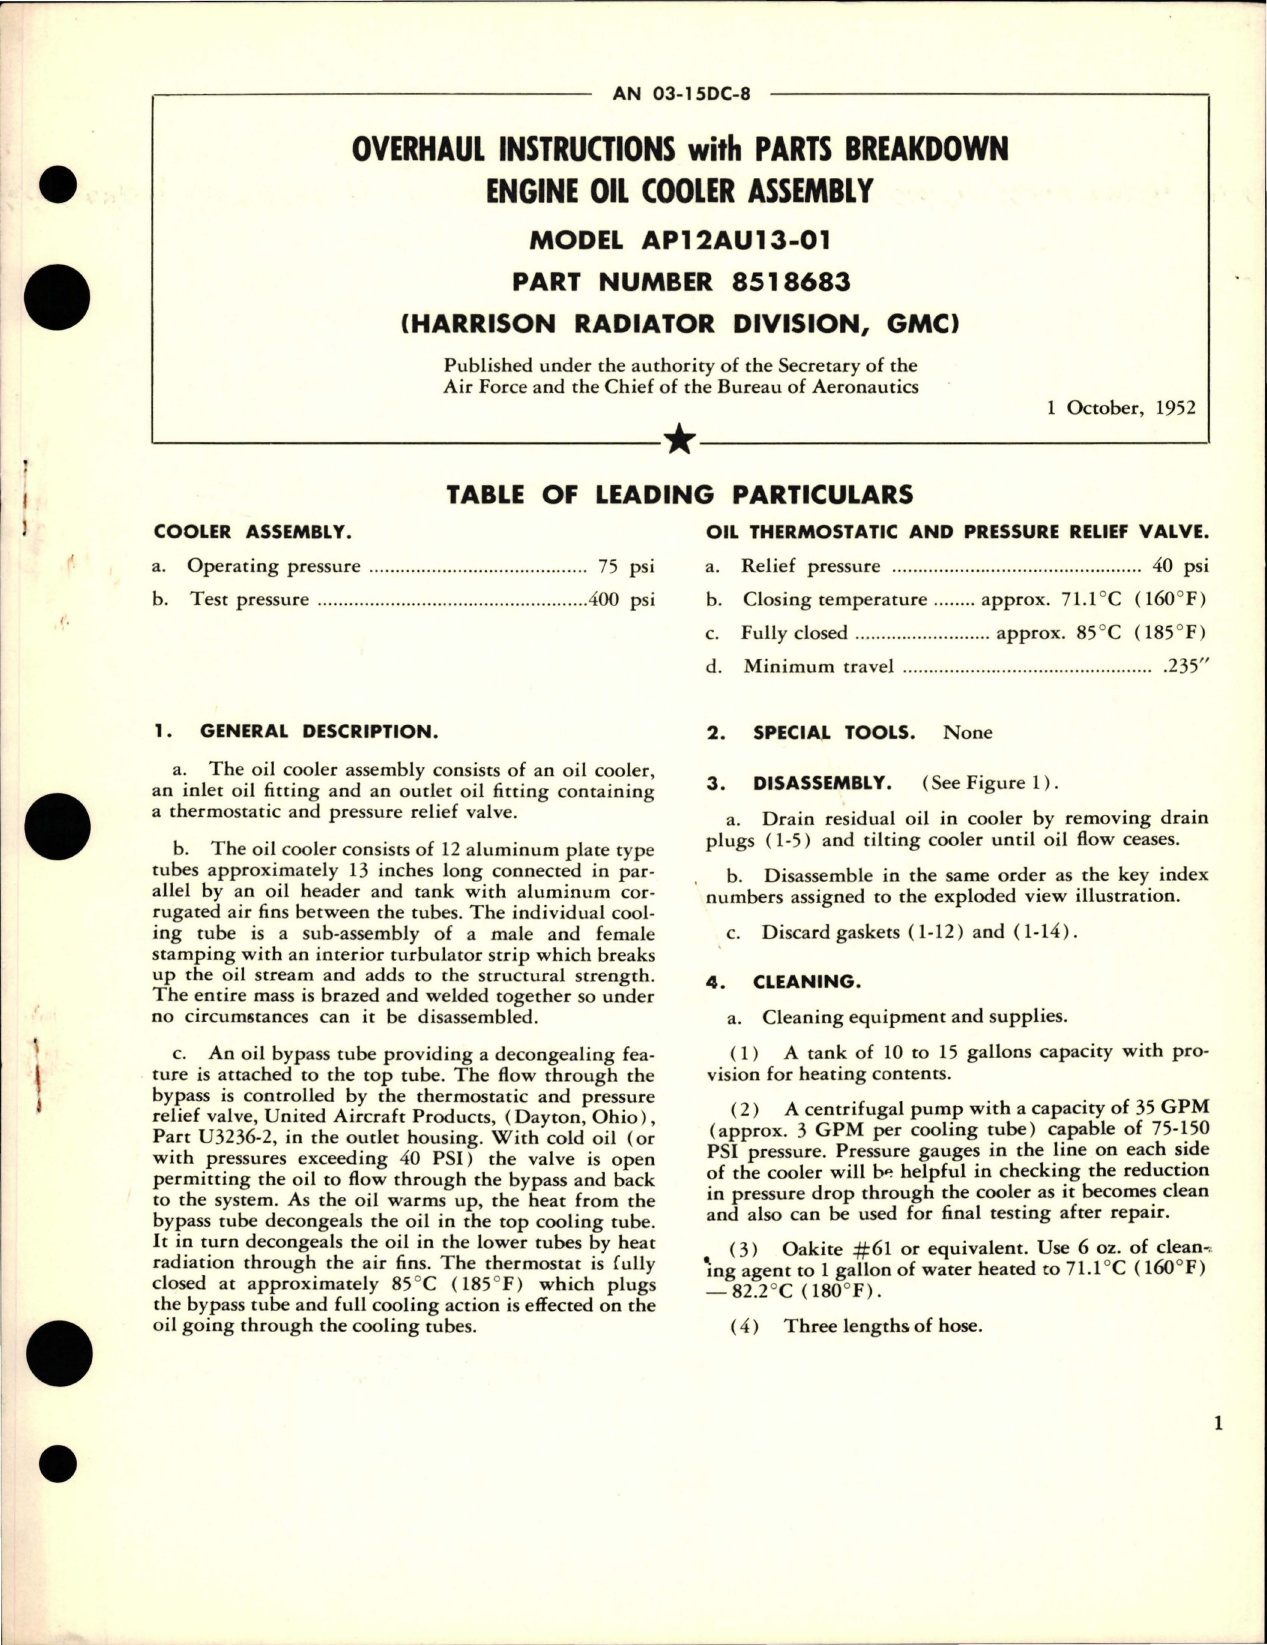 Sample page 1 from AirCorps Library document: Overhaul Instructions with Parts for Engine Oil Cooler Assembly - Model AP12AU13-01 - Part 8518683